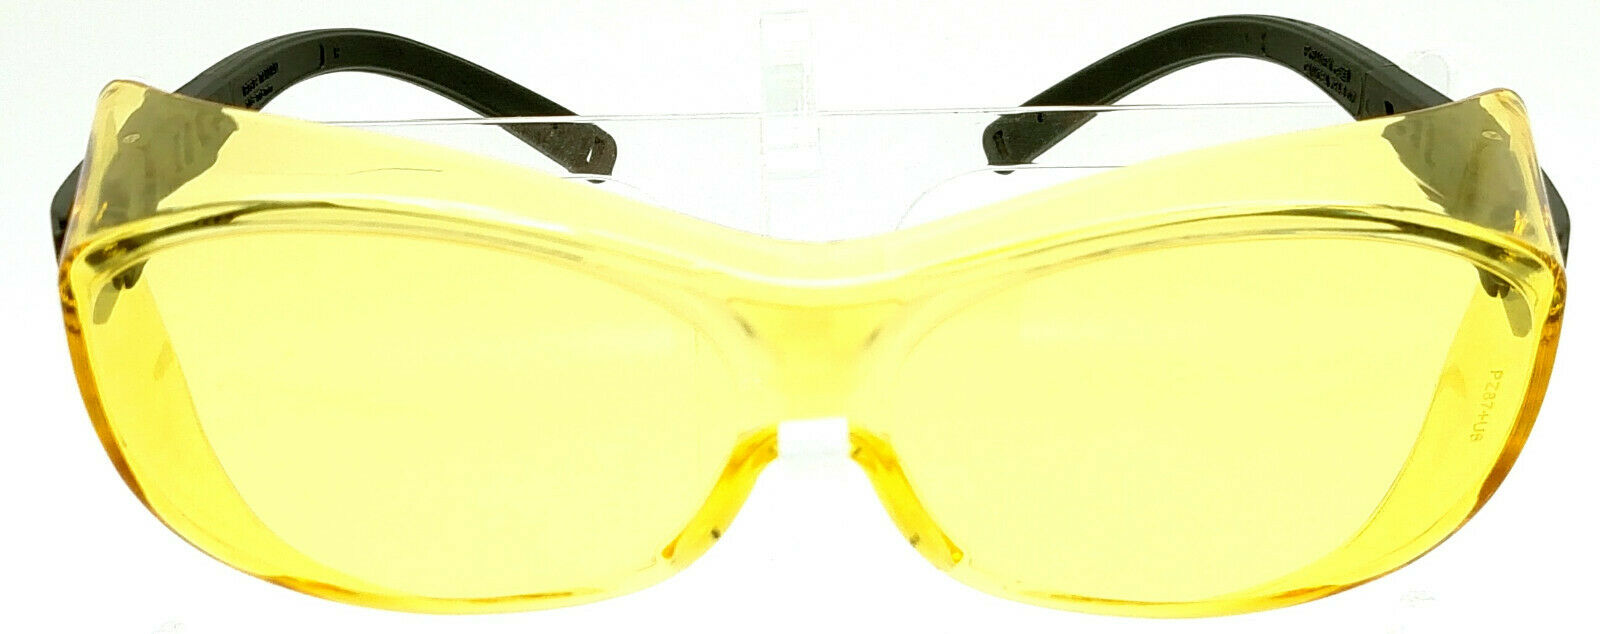 Shooter's Edge OTG Over-the-Glasse Z87.1 Safety Shooting Glasses Contrast Yellow